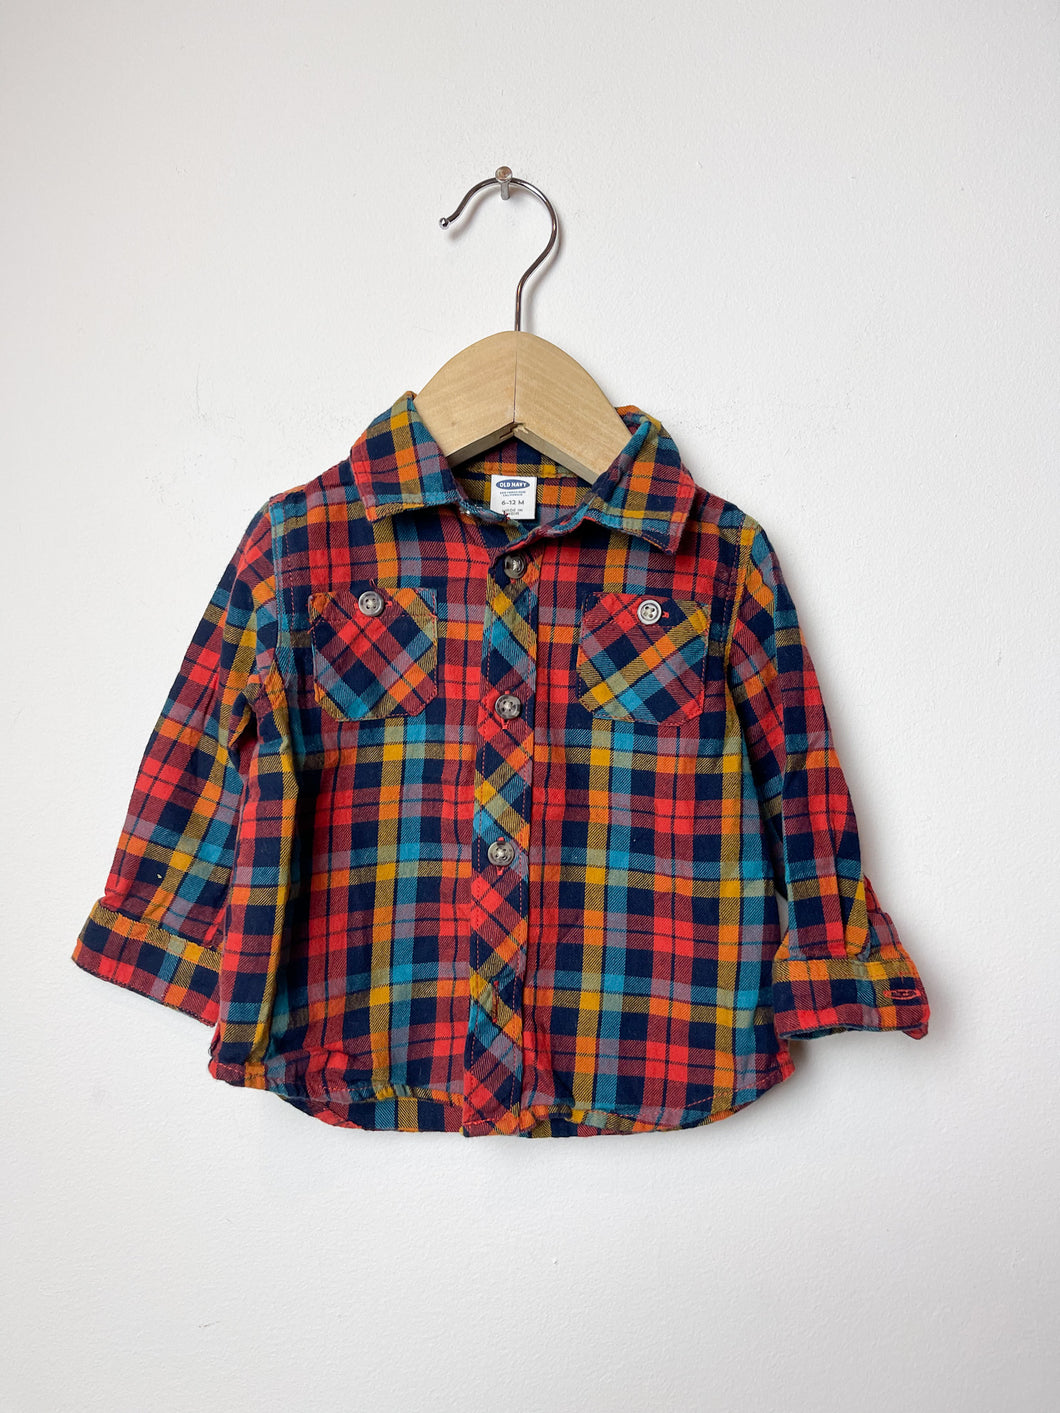 Plaid Old Navy Shirt Size 6-12 Months